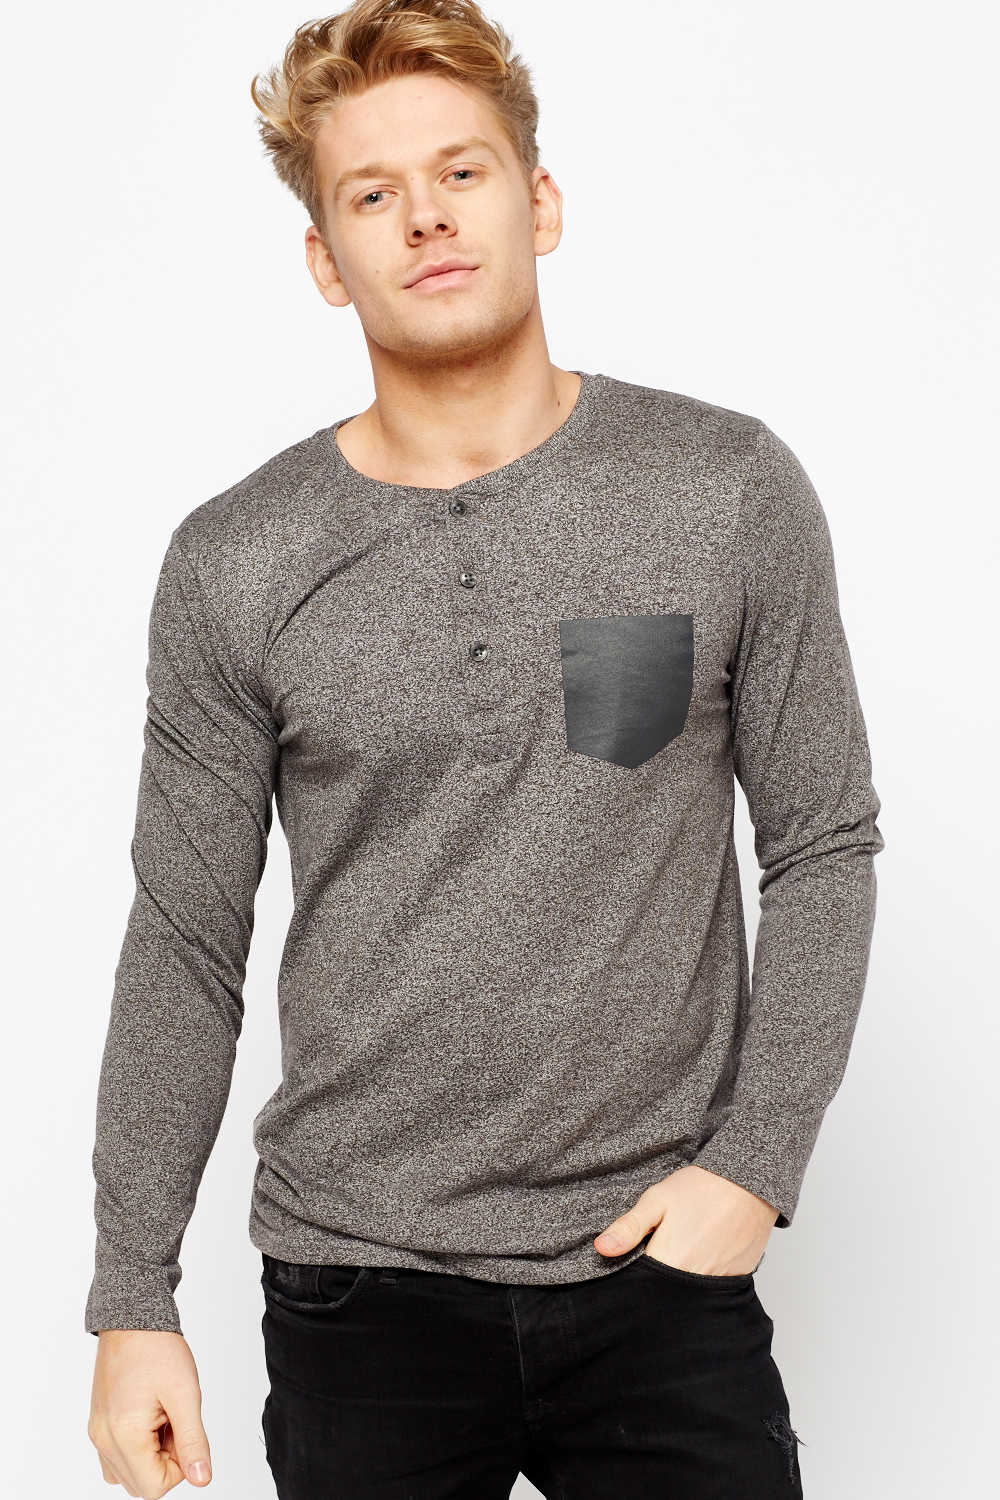 Button Neck Speckled T-Shirt - Just $7